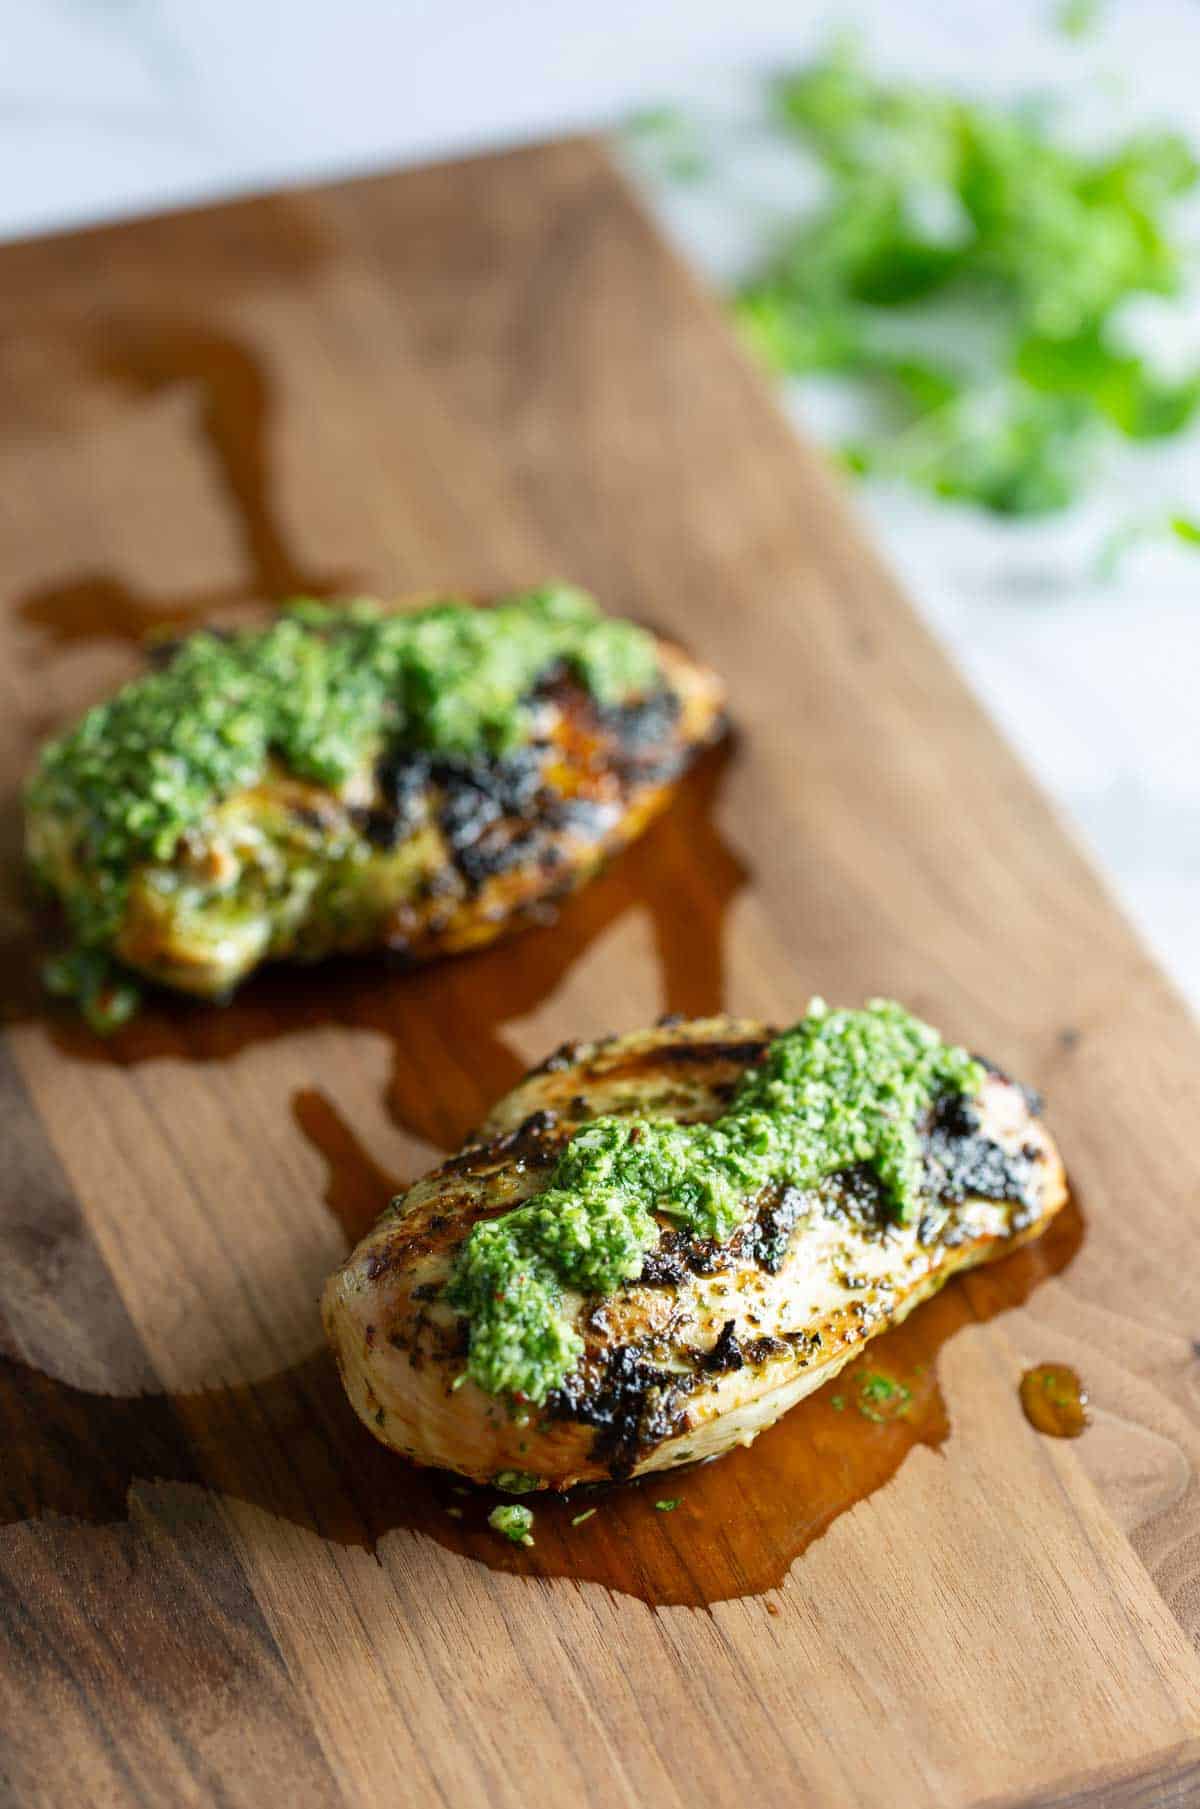 Two grilled chicken breasts topped with chimichurri sauce on a wooden cutting board, with some herbs in the background.